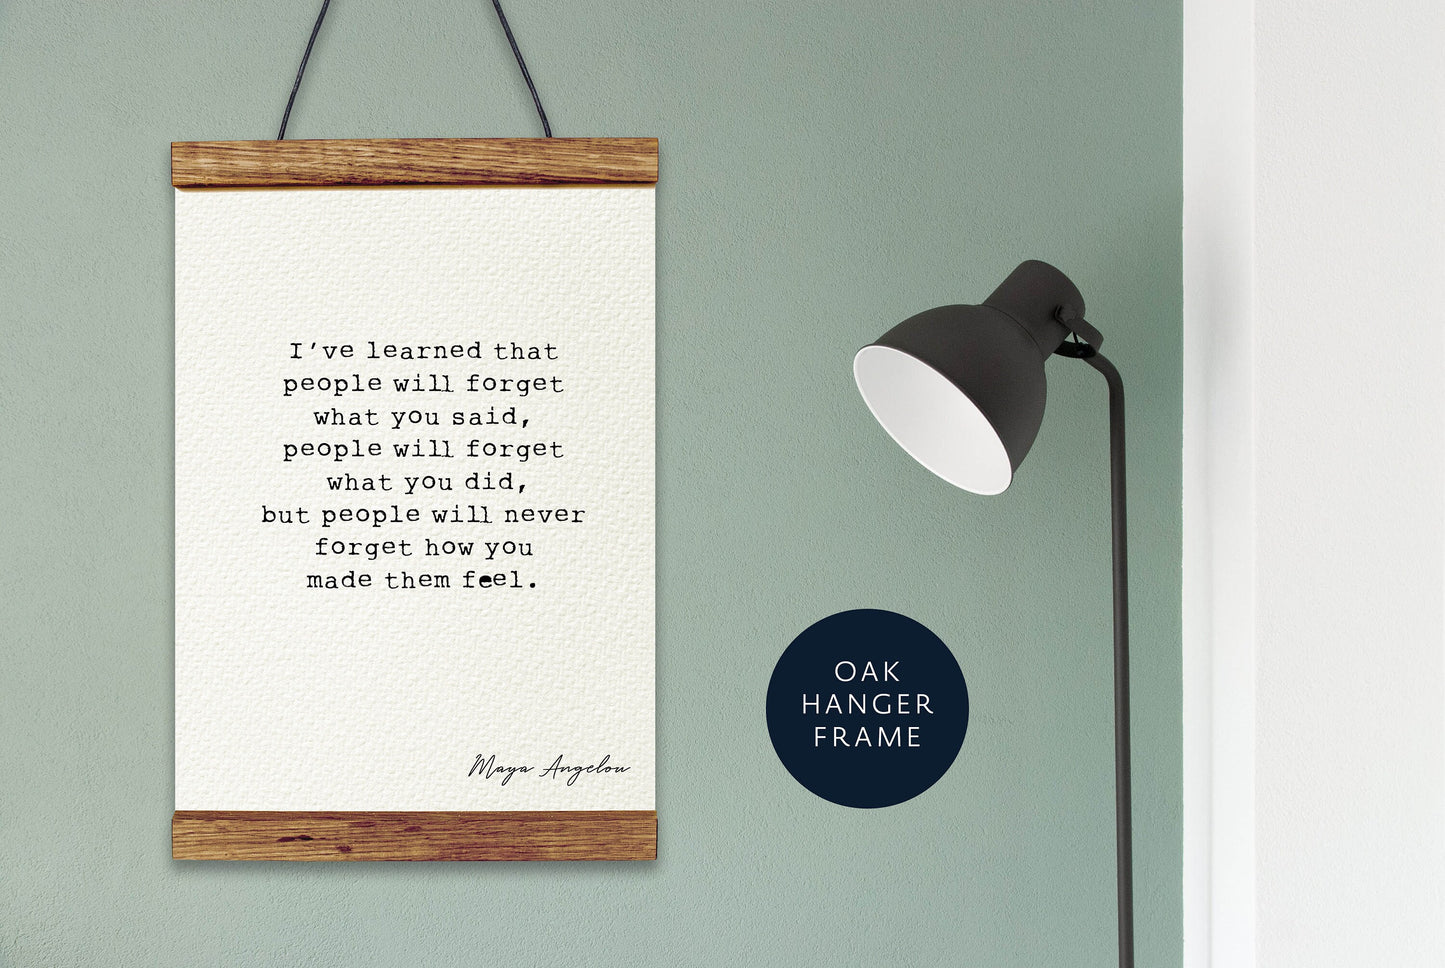 Maya Angelou Quote - I've Learned That People Will Forget Poster - Maya Angelou Print - Wall Art - Wall decor quote Framed